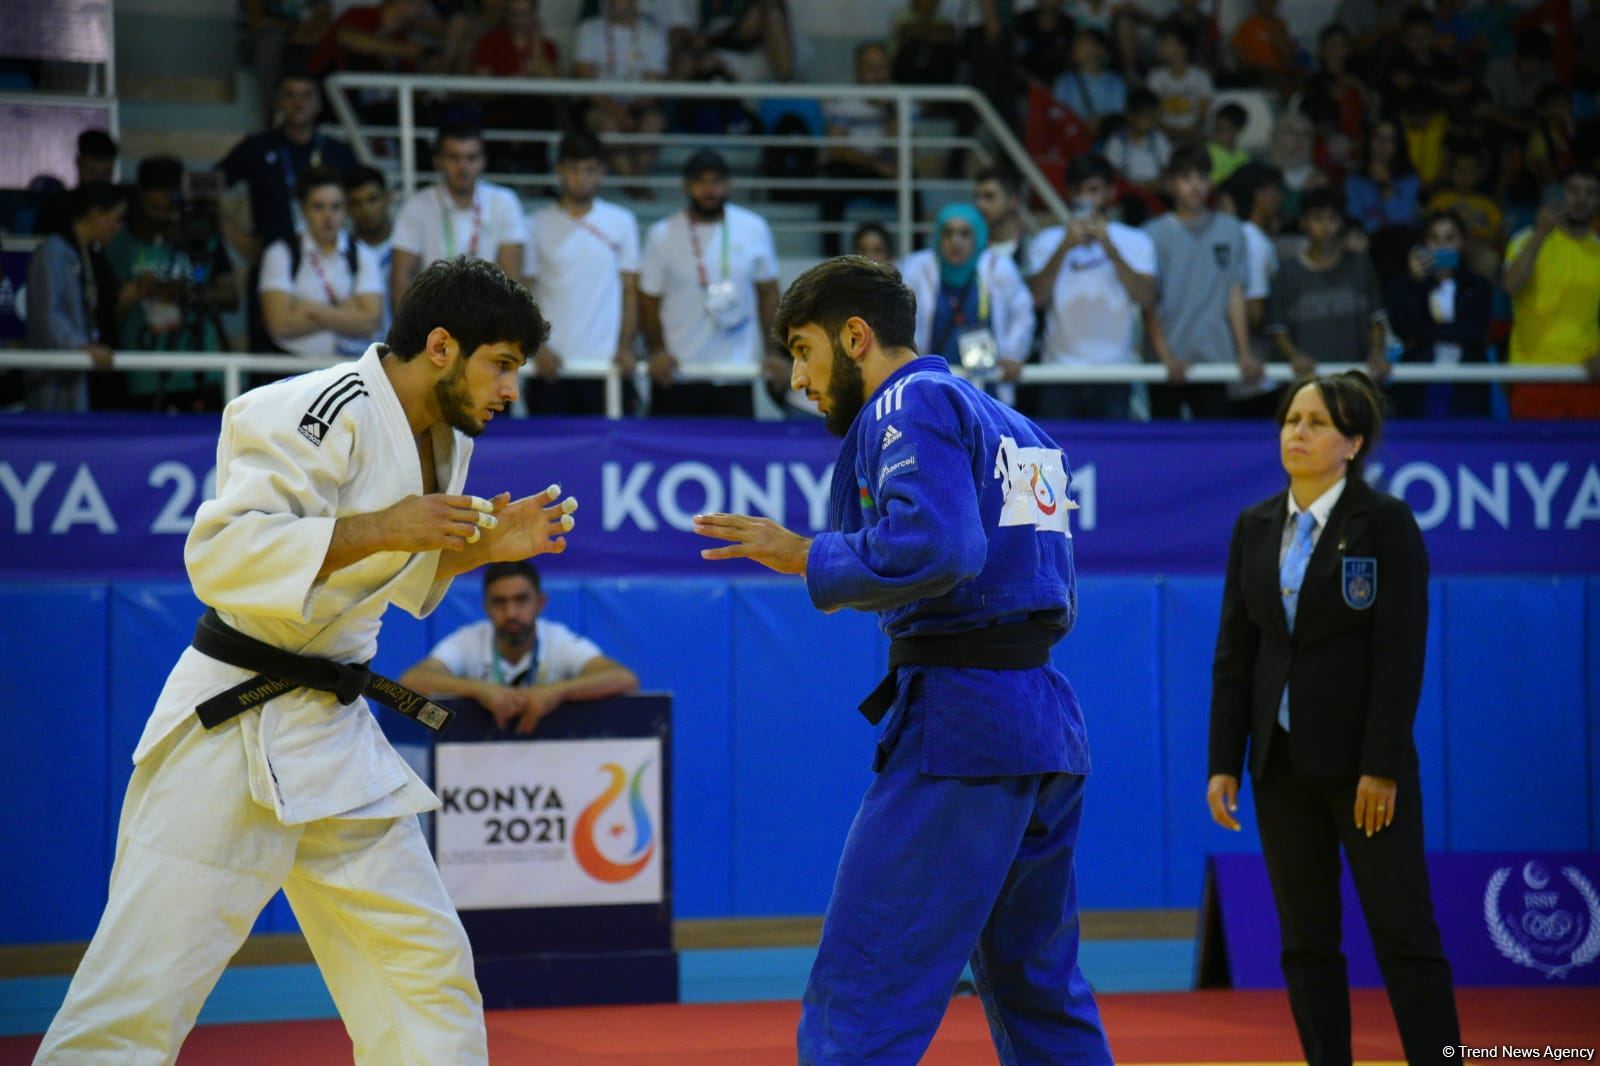 Another Azerbaijani athlete advances to next stage of judo competitions at V Islamic Solidarity Games (PHOTO)